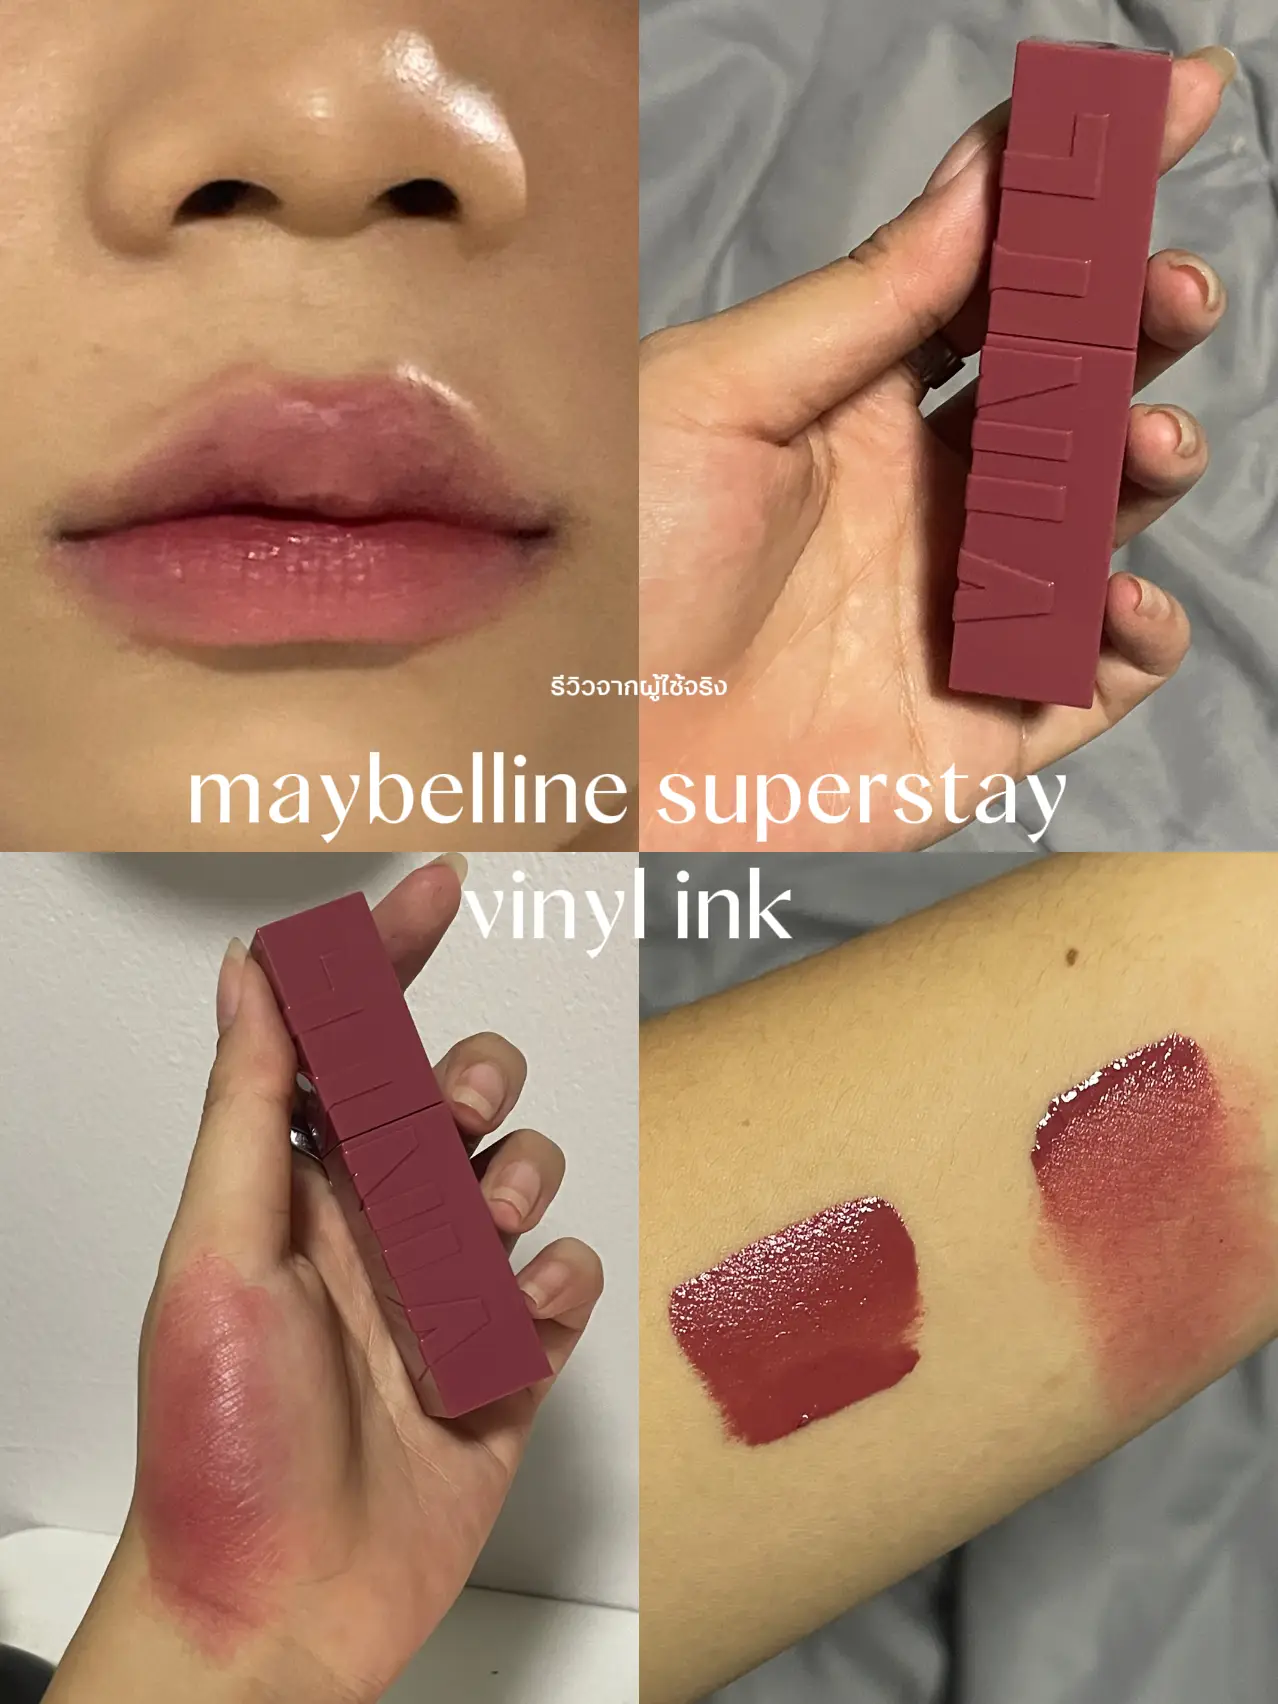 Maybelline Superstay Vinyl ink lip review, Gallery posted by Thaddaw